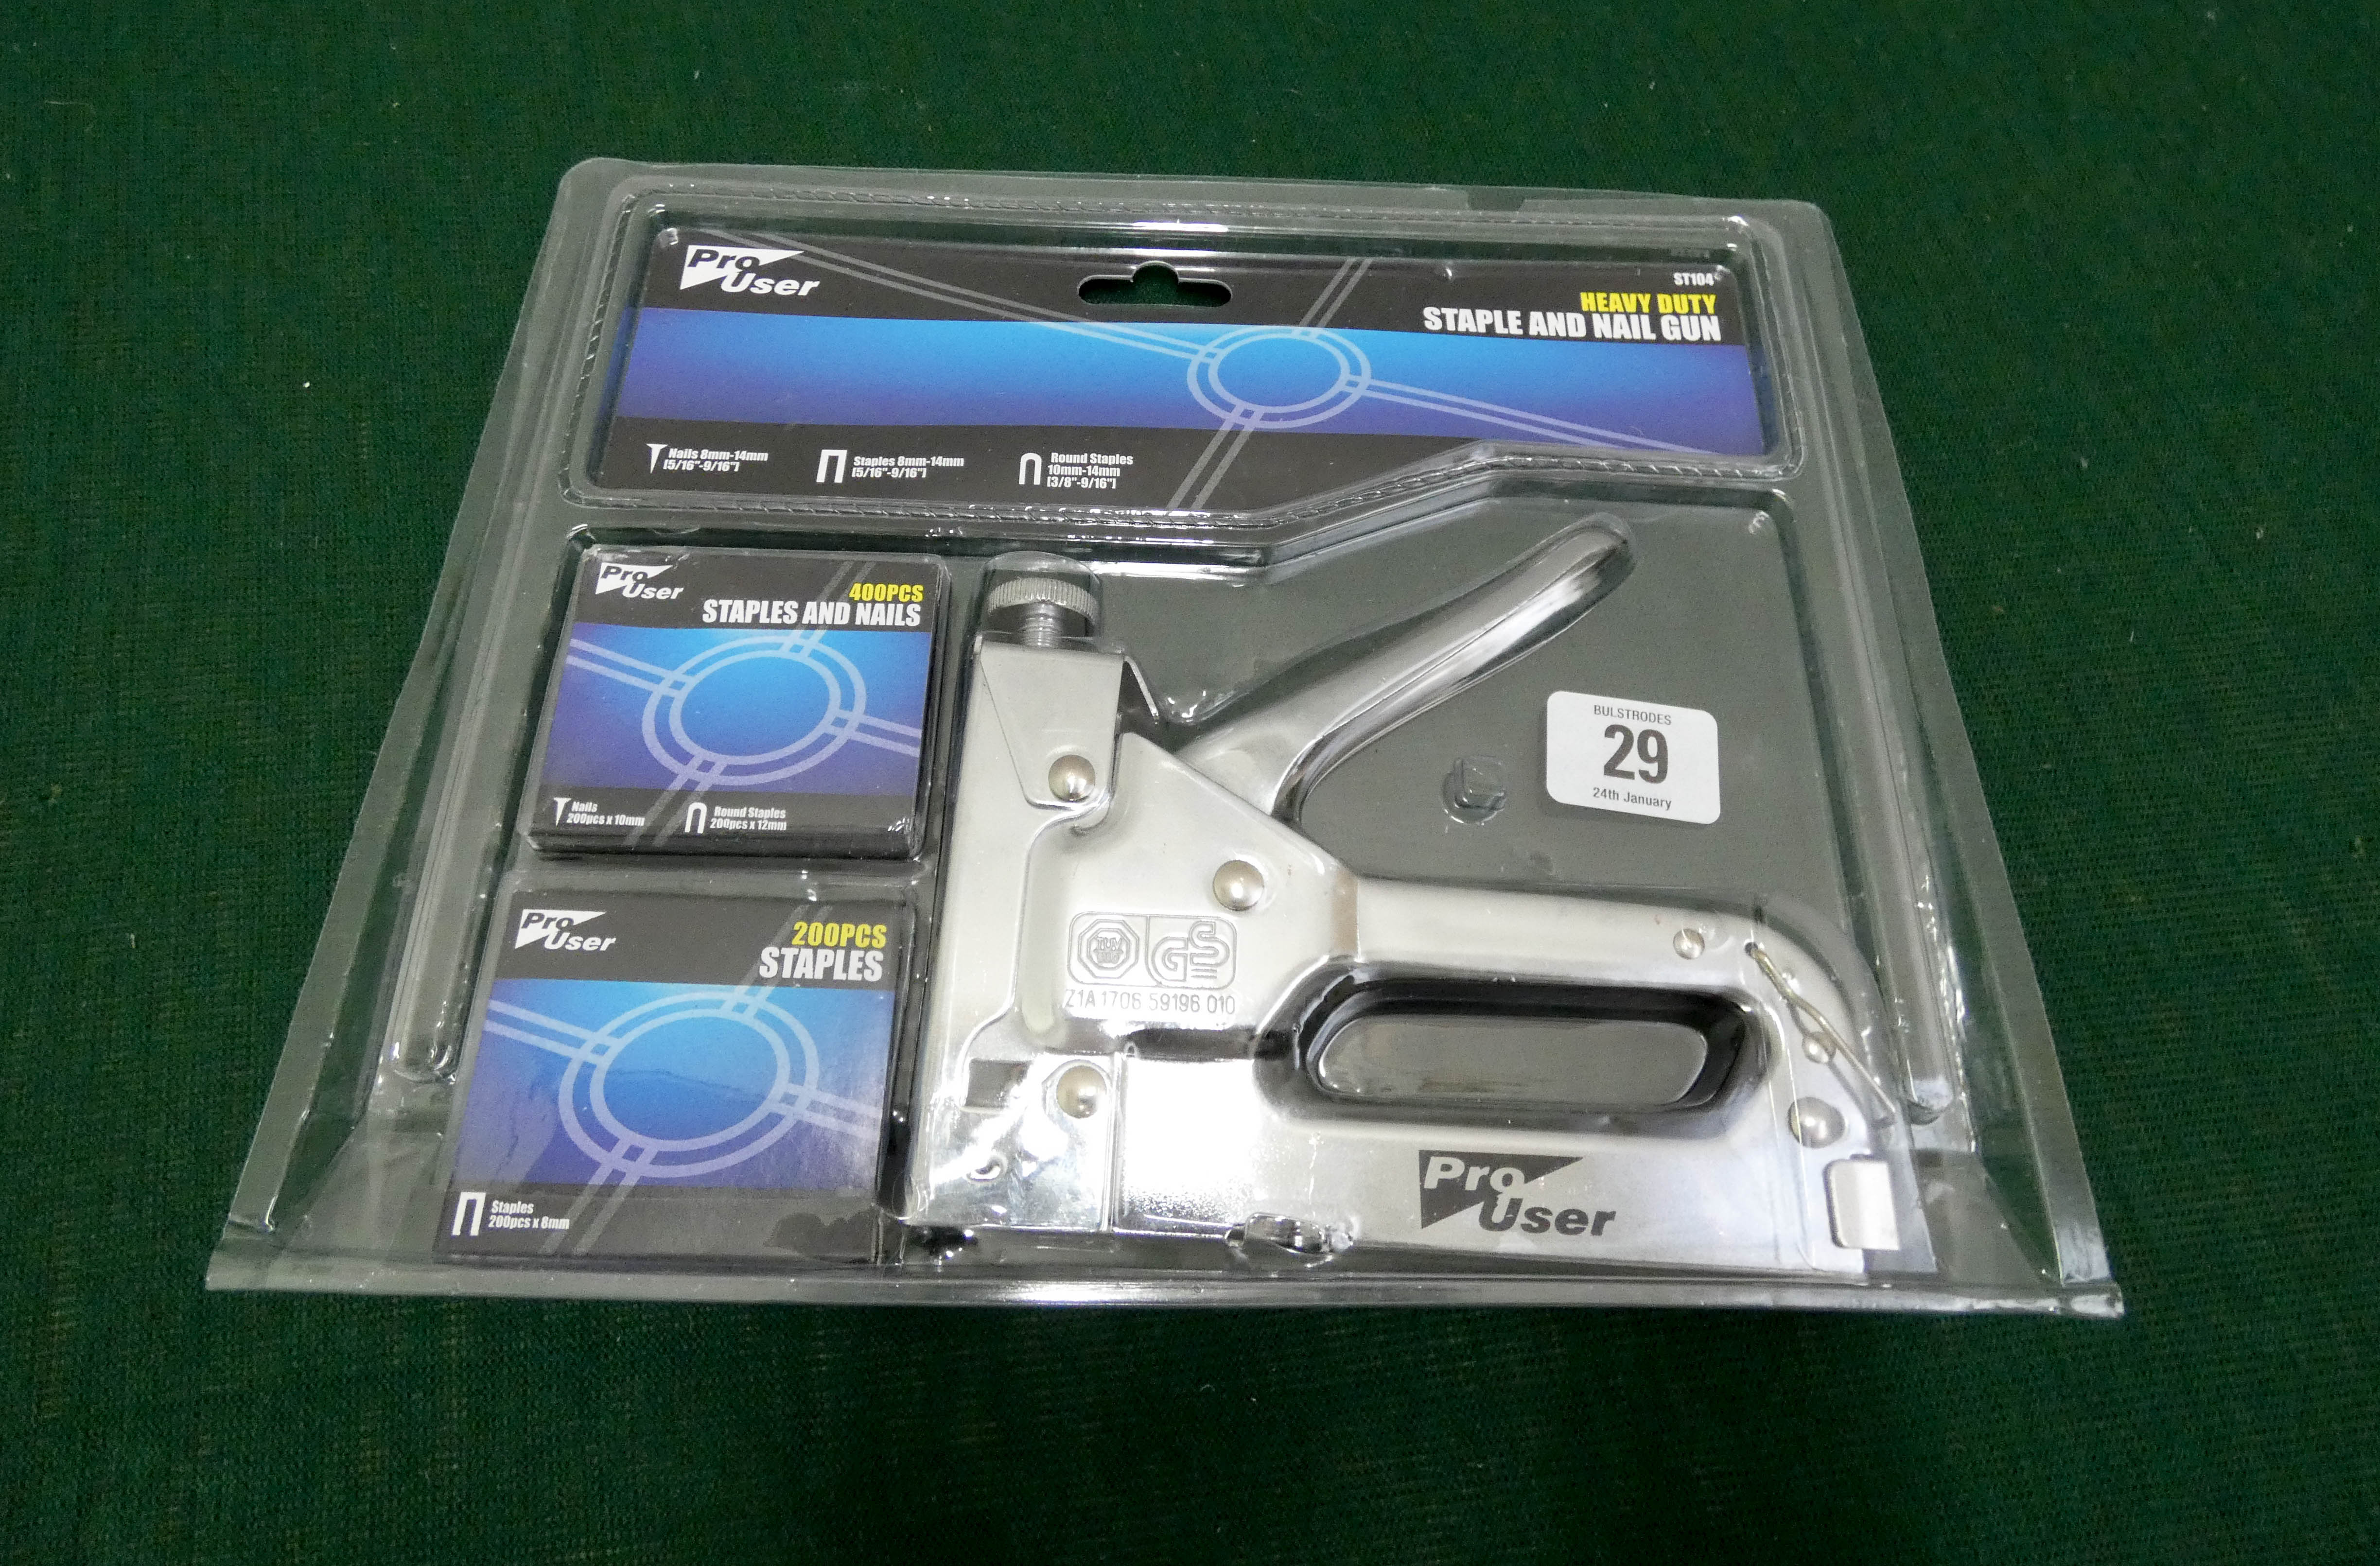 A new heavy duty staple nail and gun with accessories